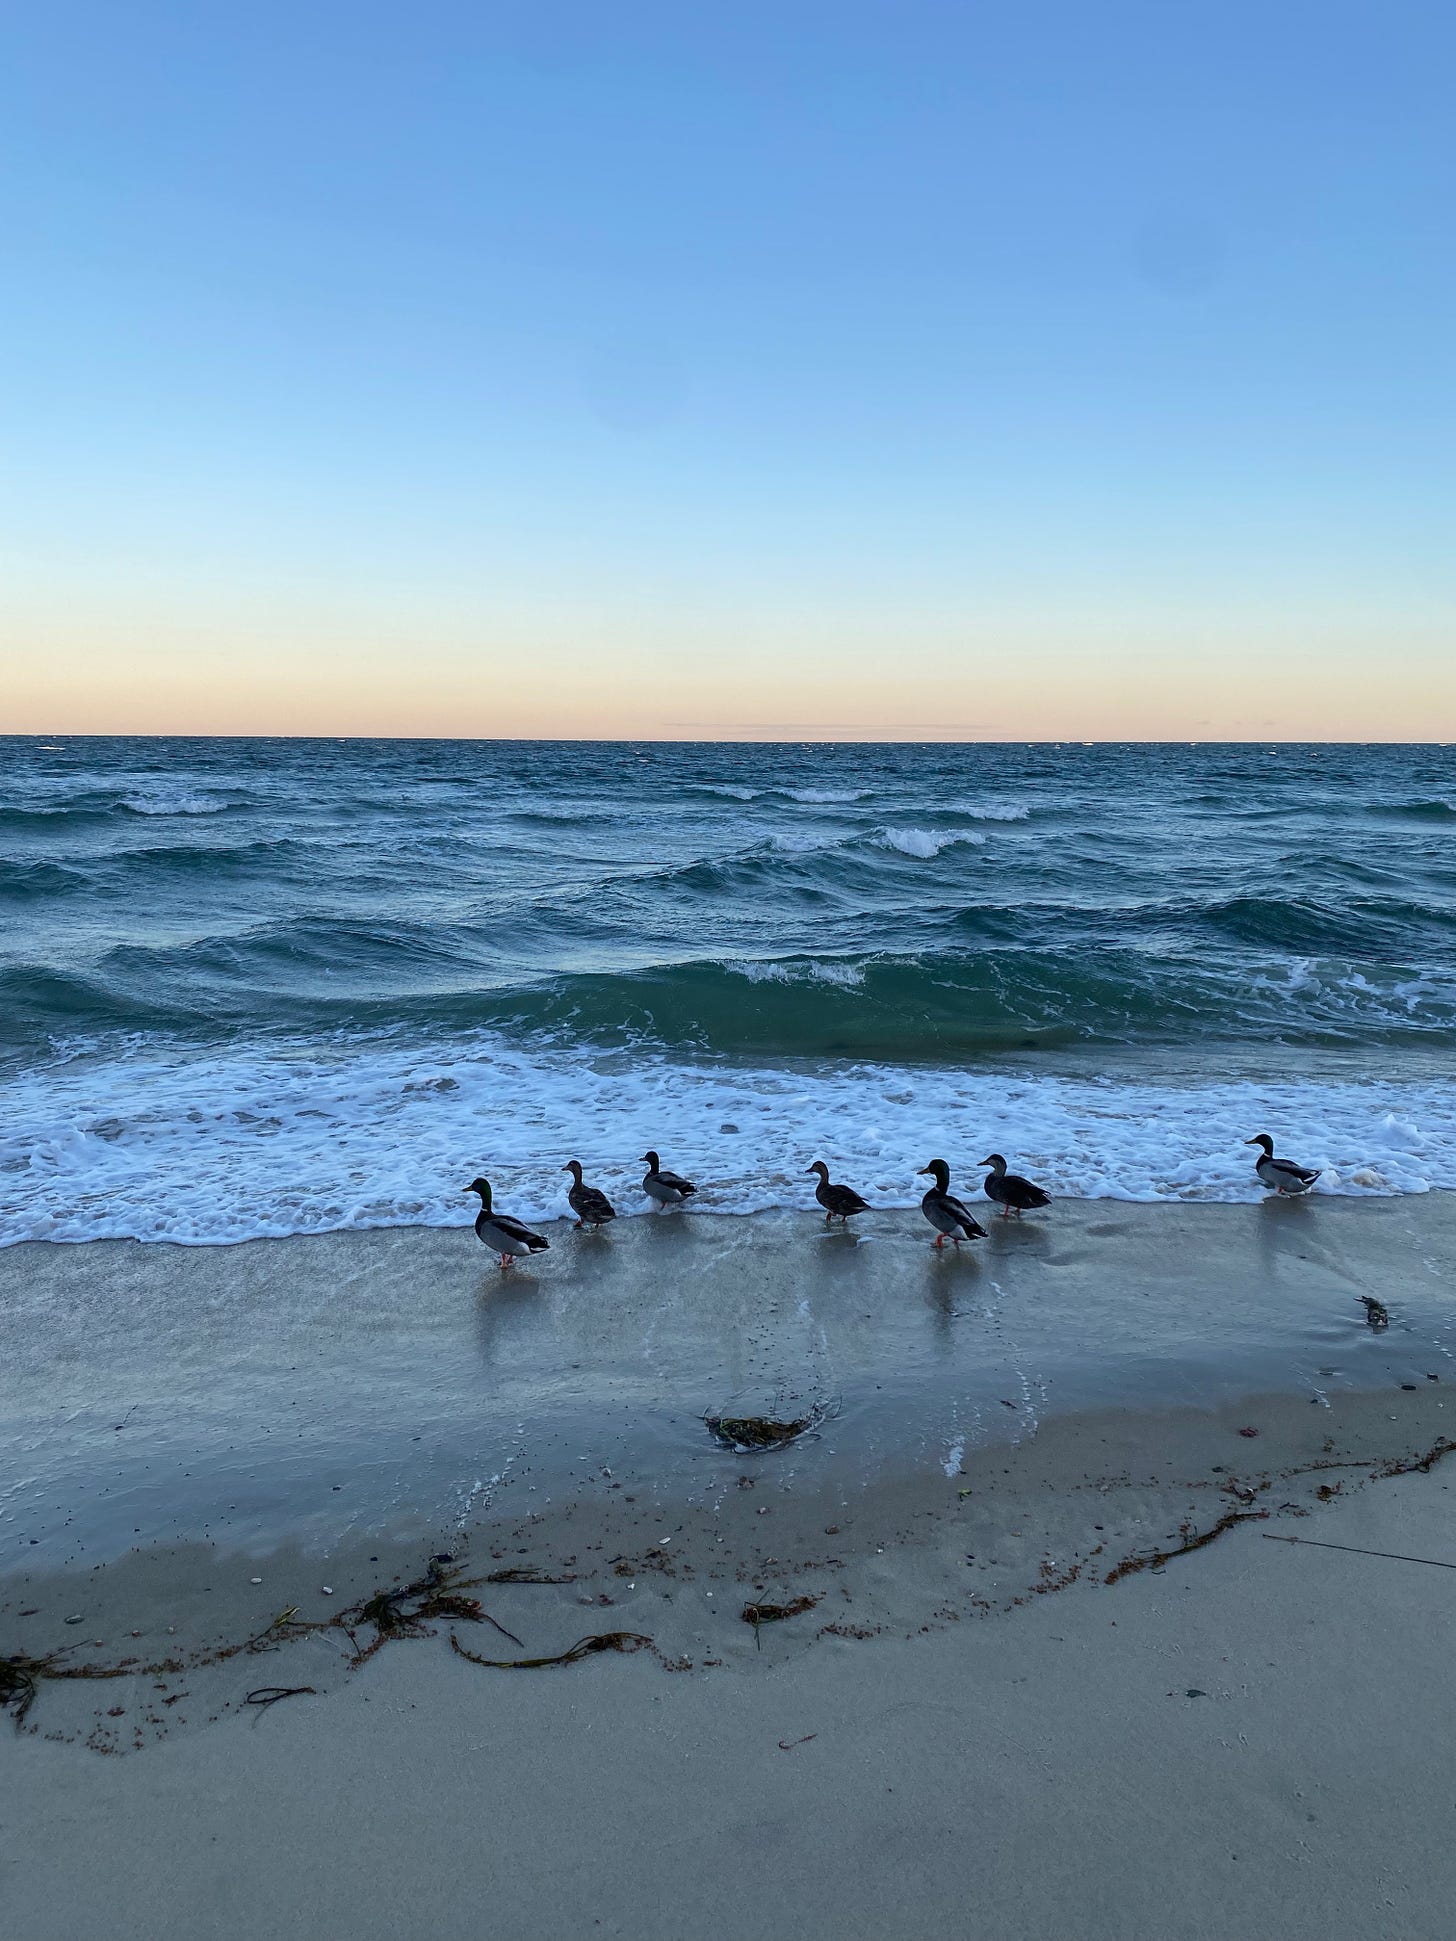 Seven ducks standing in the surf, a white wave breaking over their feet. The ocean is green and wavy; the sunrise sky pale orange on the horizon, fading into blue.